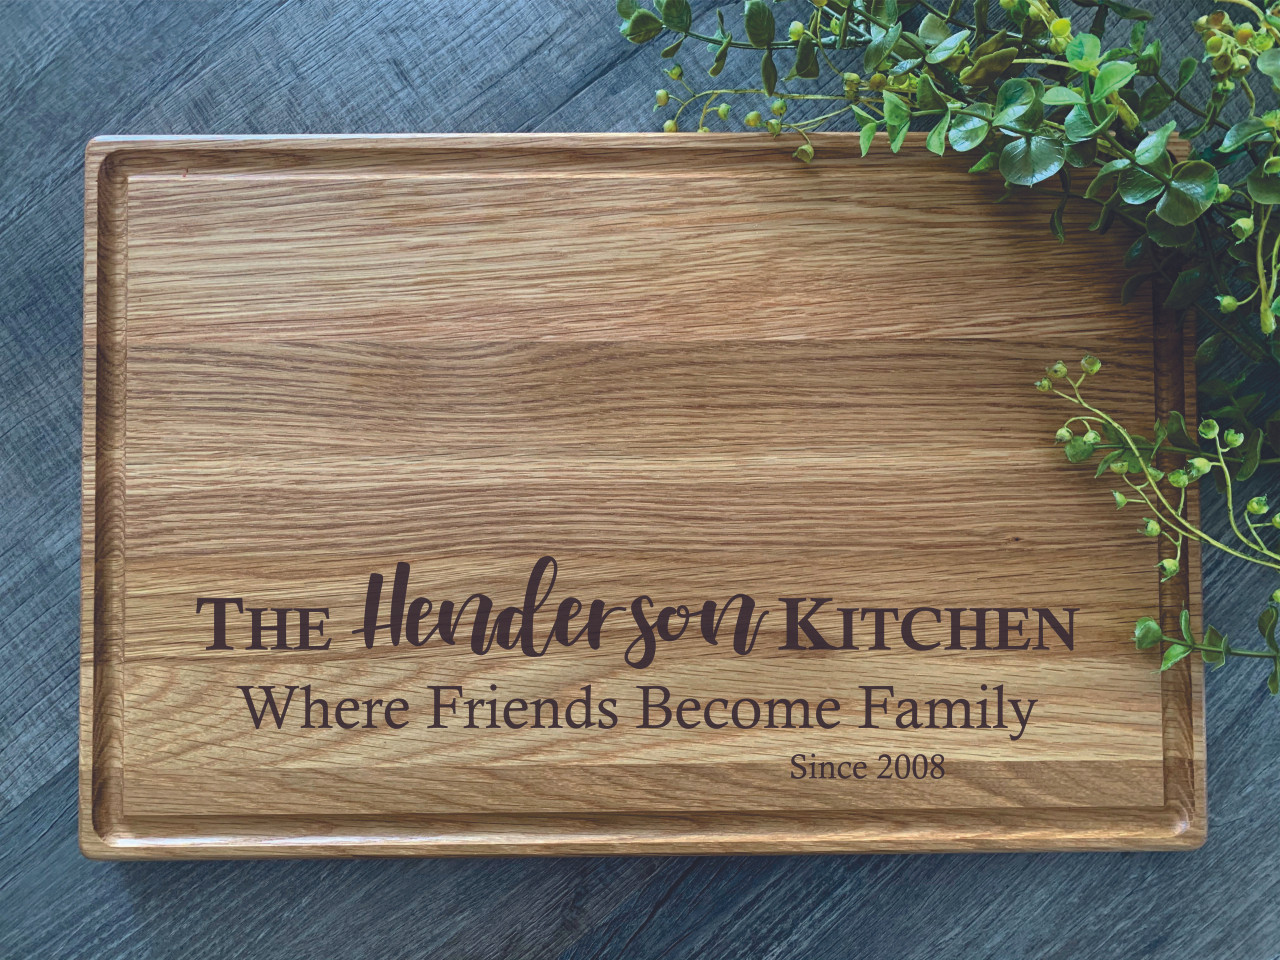 Friends Are The Family We Choose  Engraved Friendship Quote On Wood -  woodgeekstore